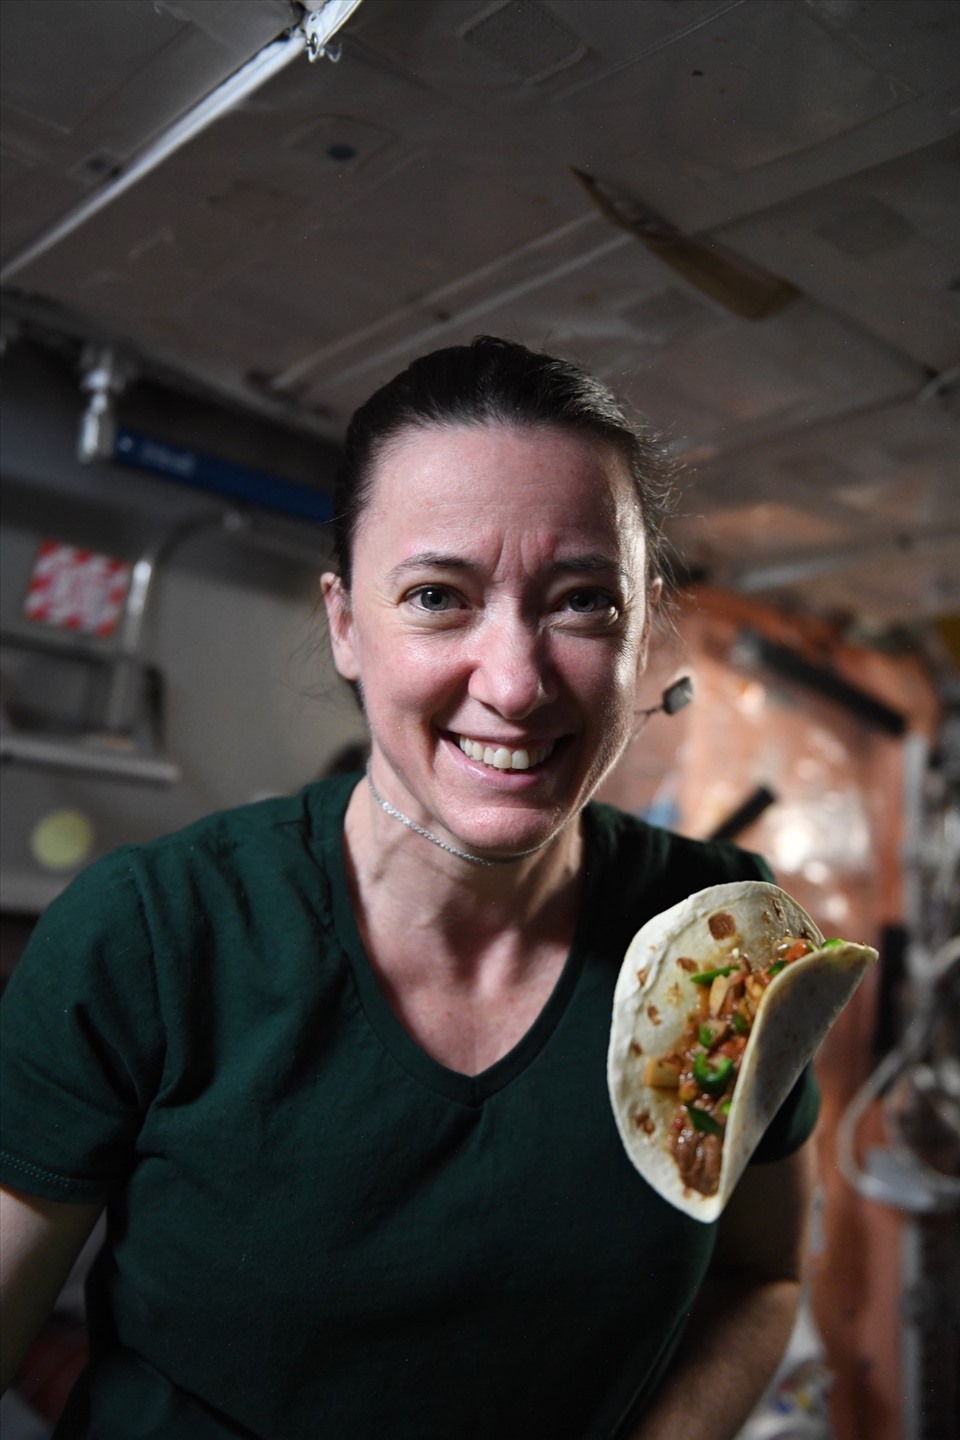 NASA astronaut Megan McArthur shows a cake with peppers on the ISS space station.  Photo: NASA